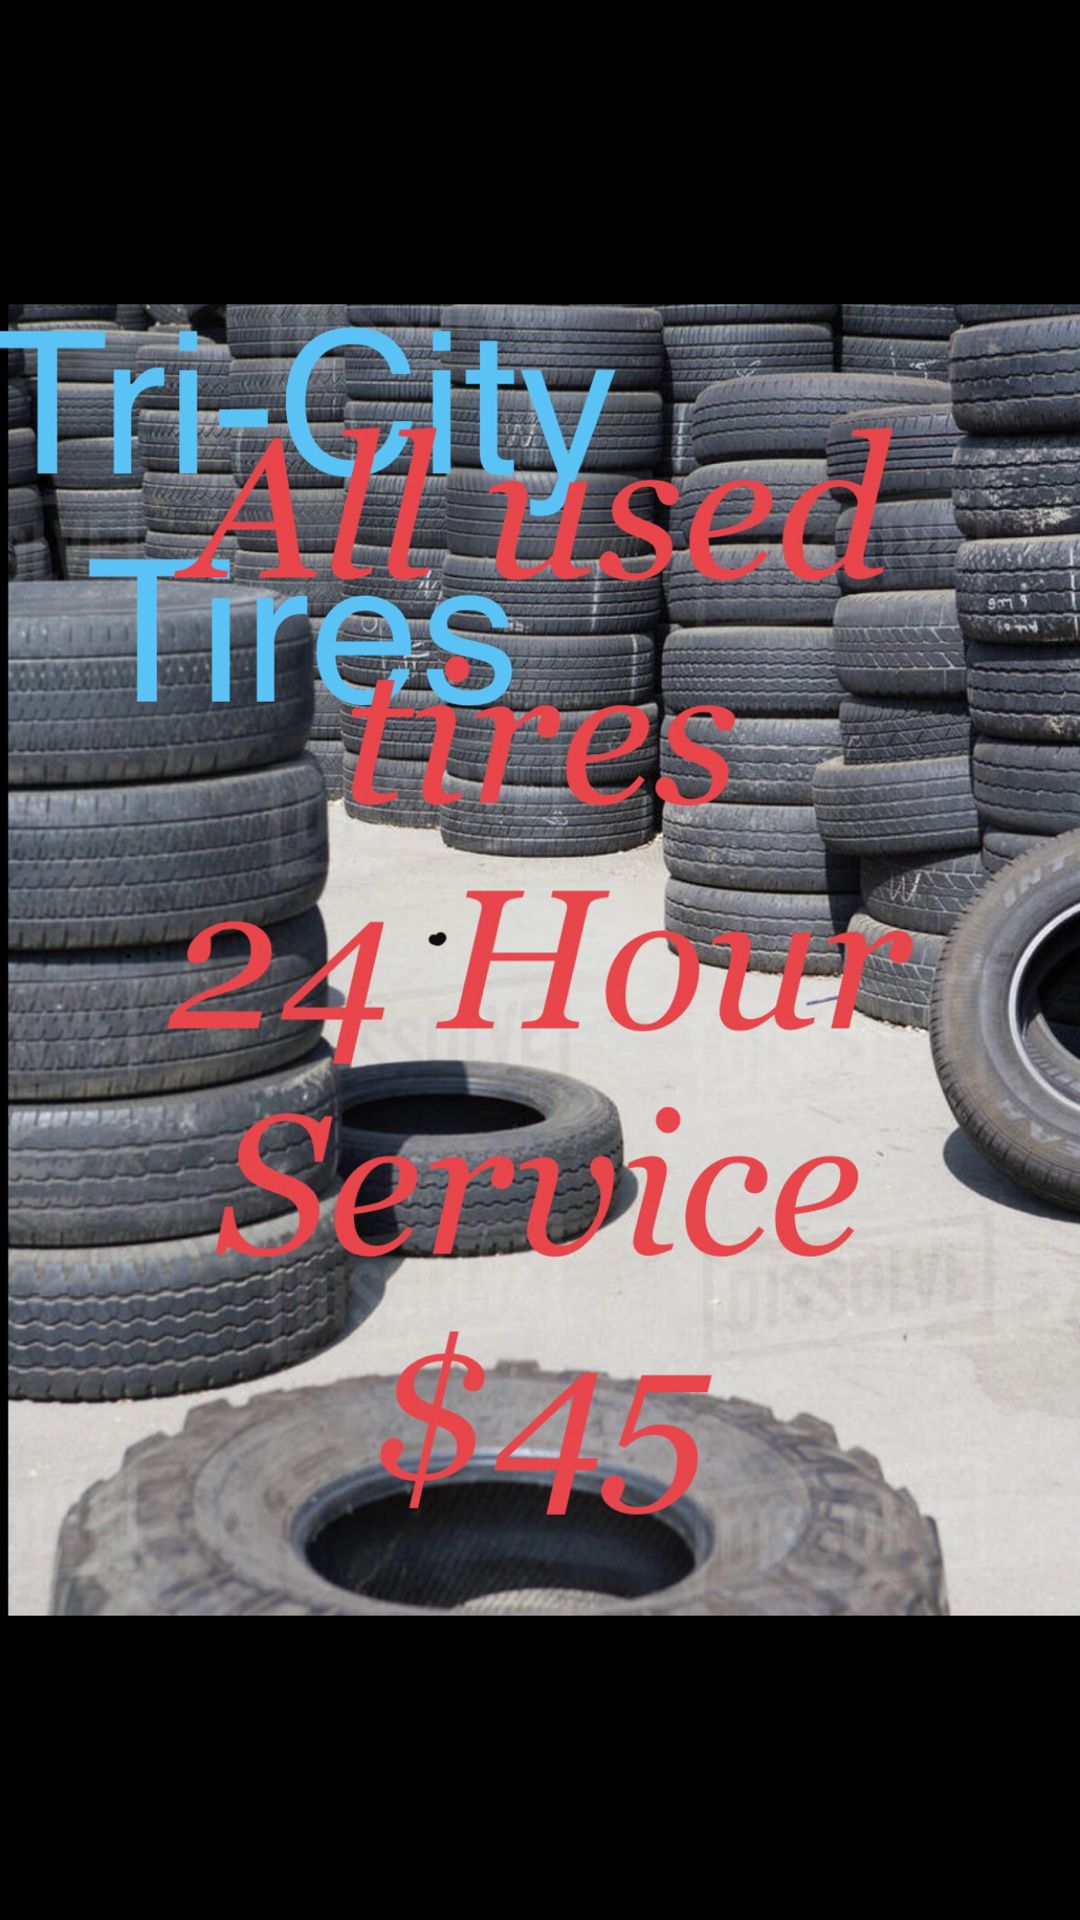 All used new tires for sale